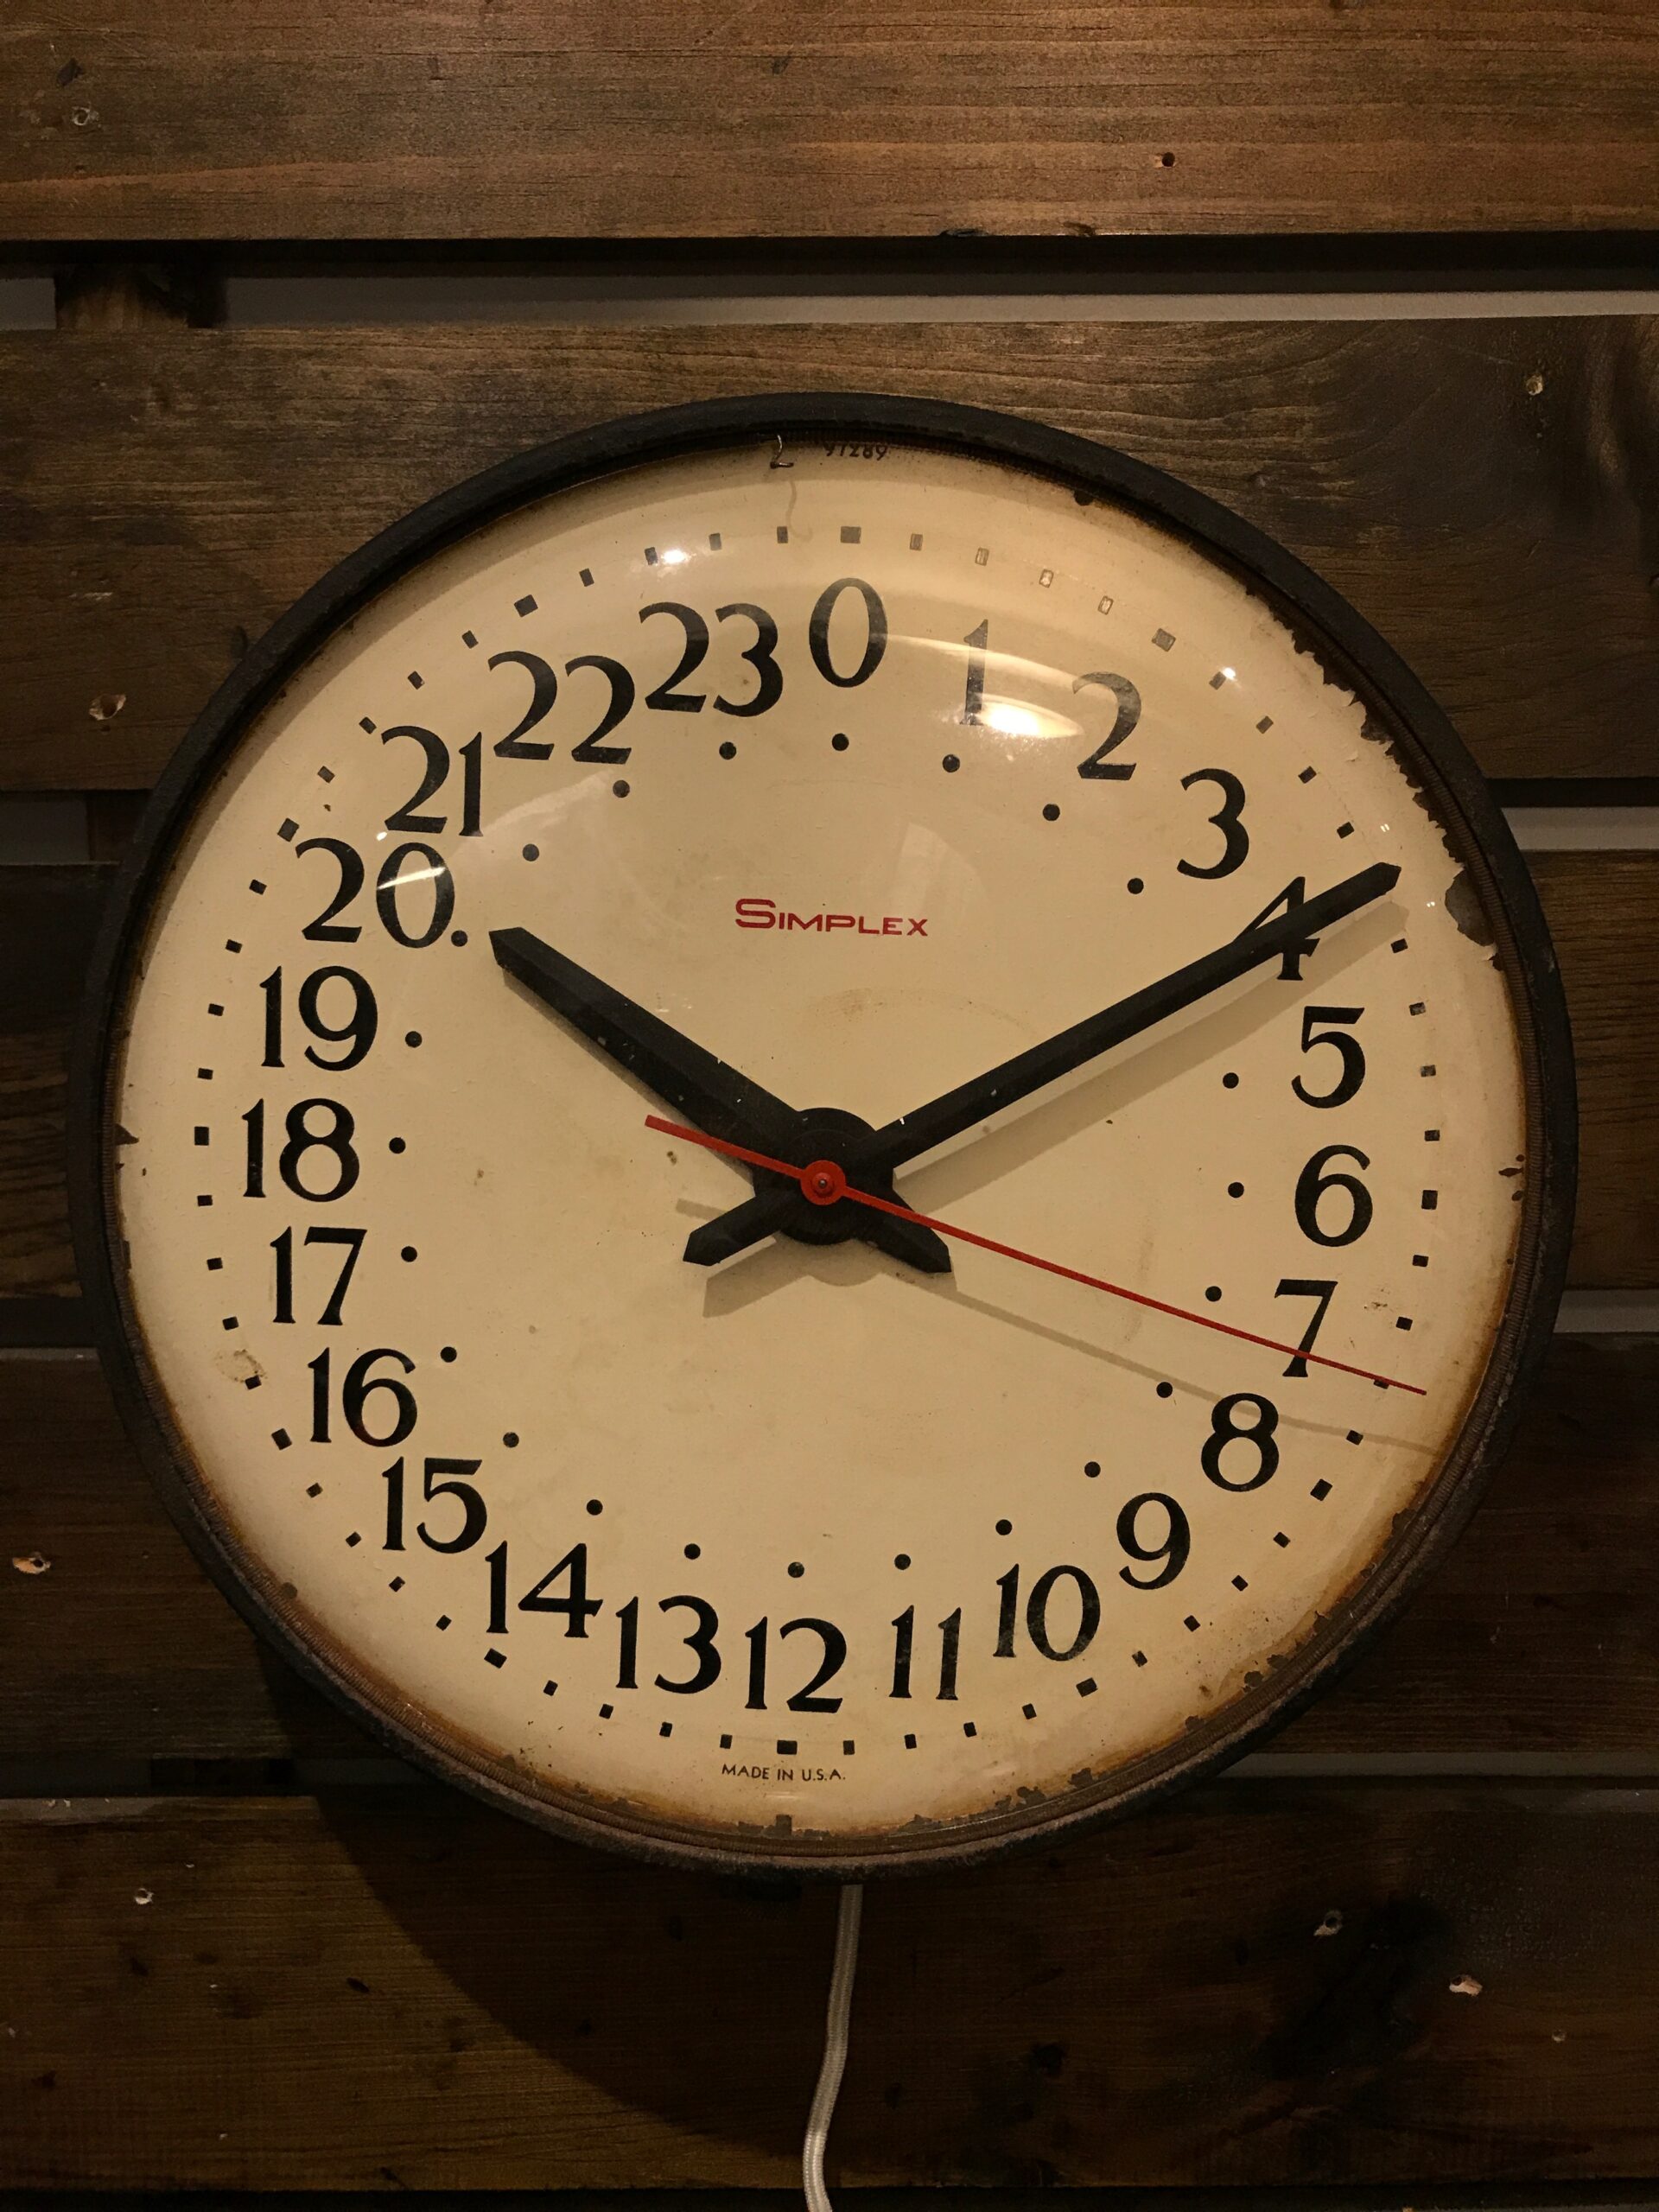 24 Hour, Military Time. Simplex. This is standard Military Clock or european